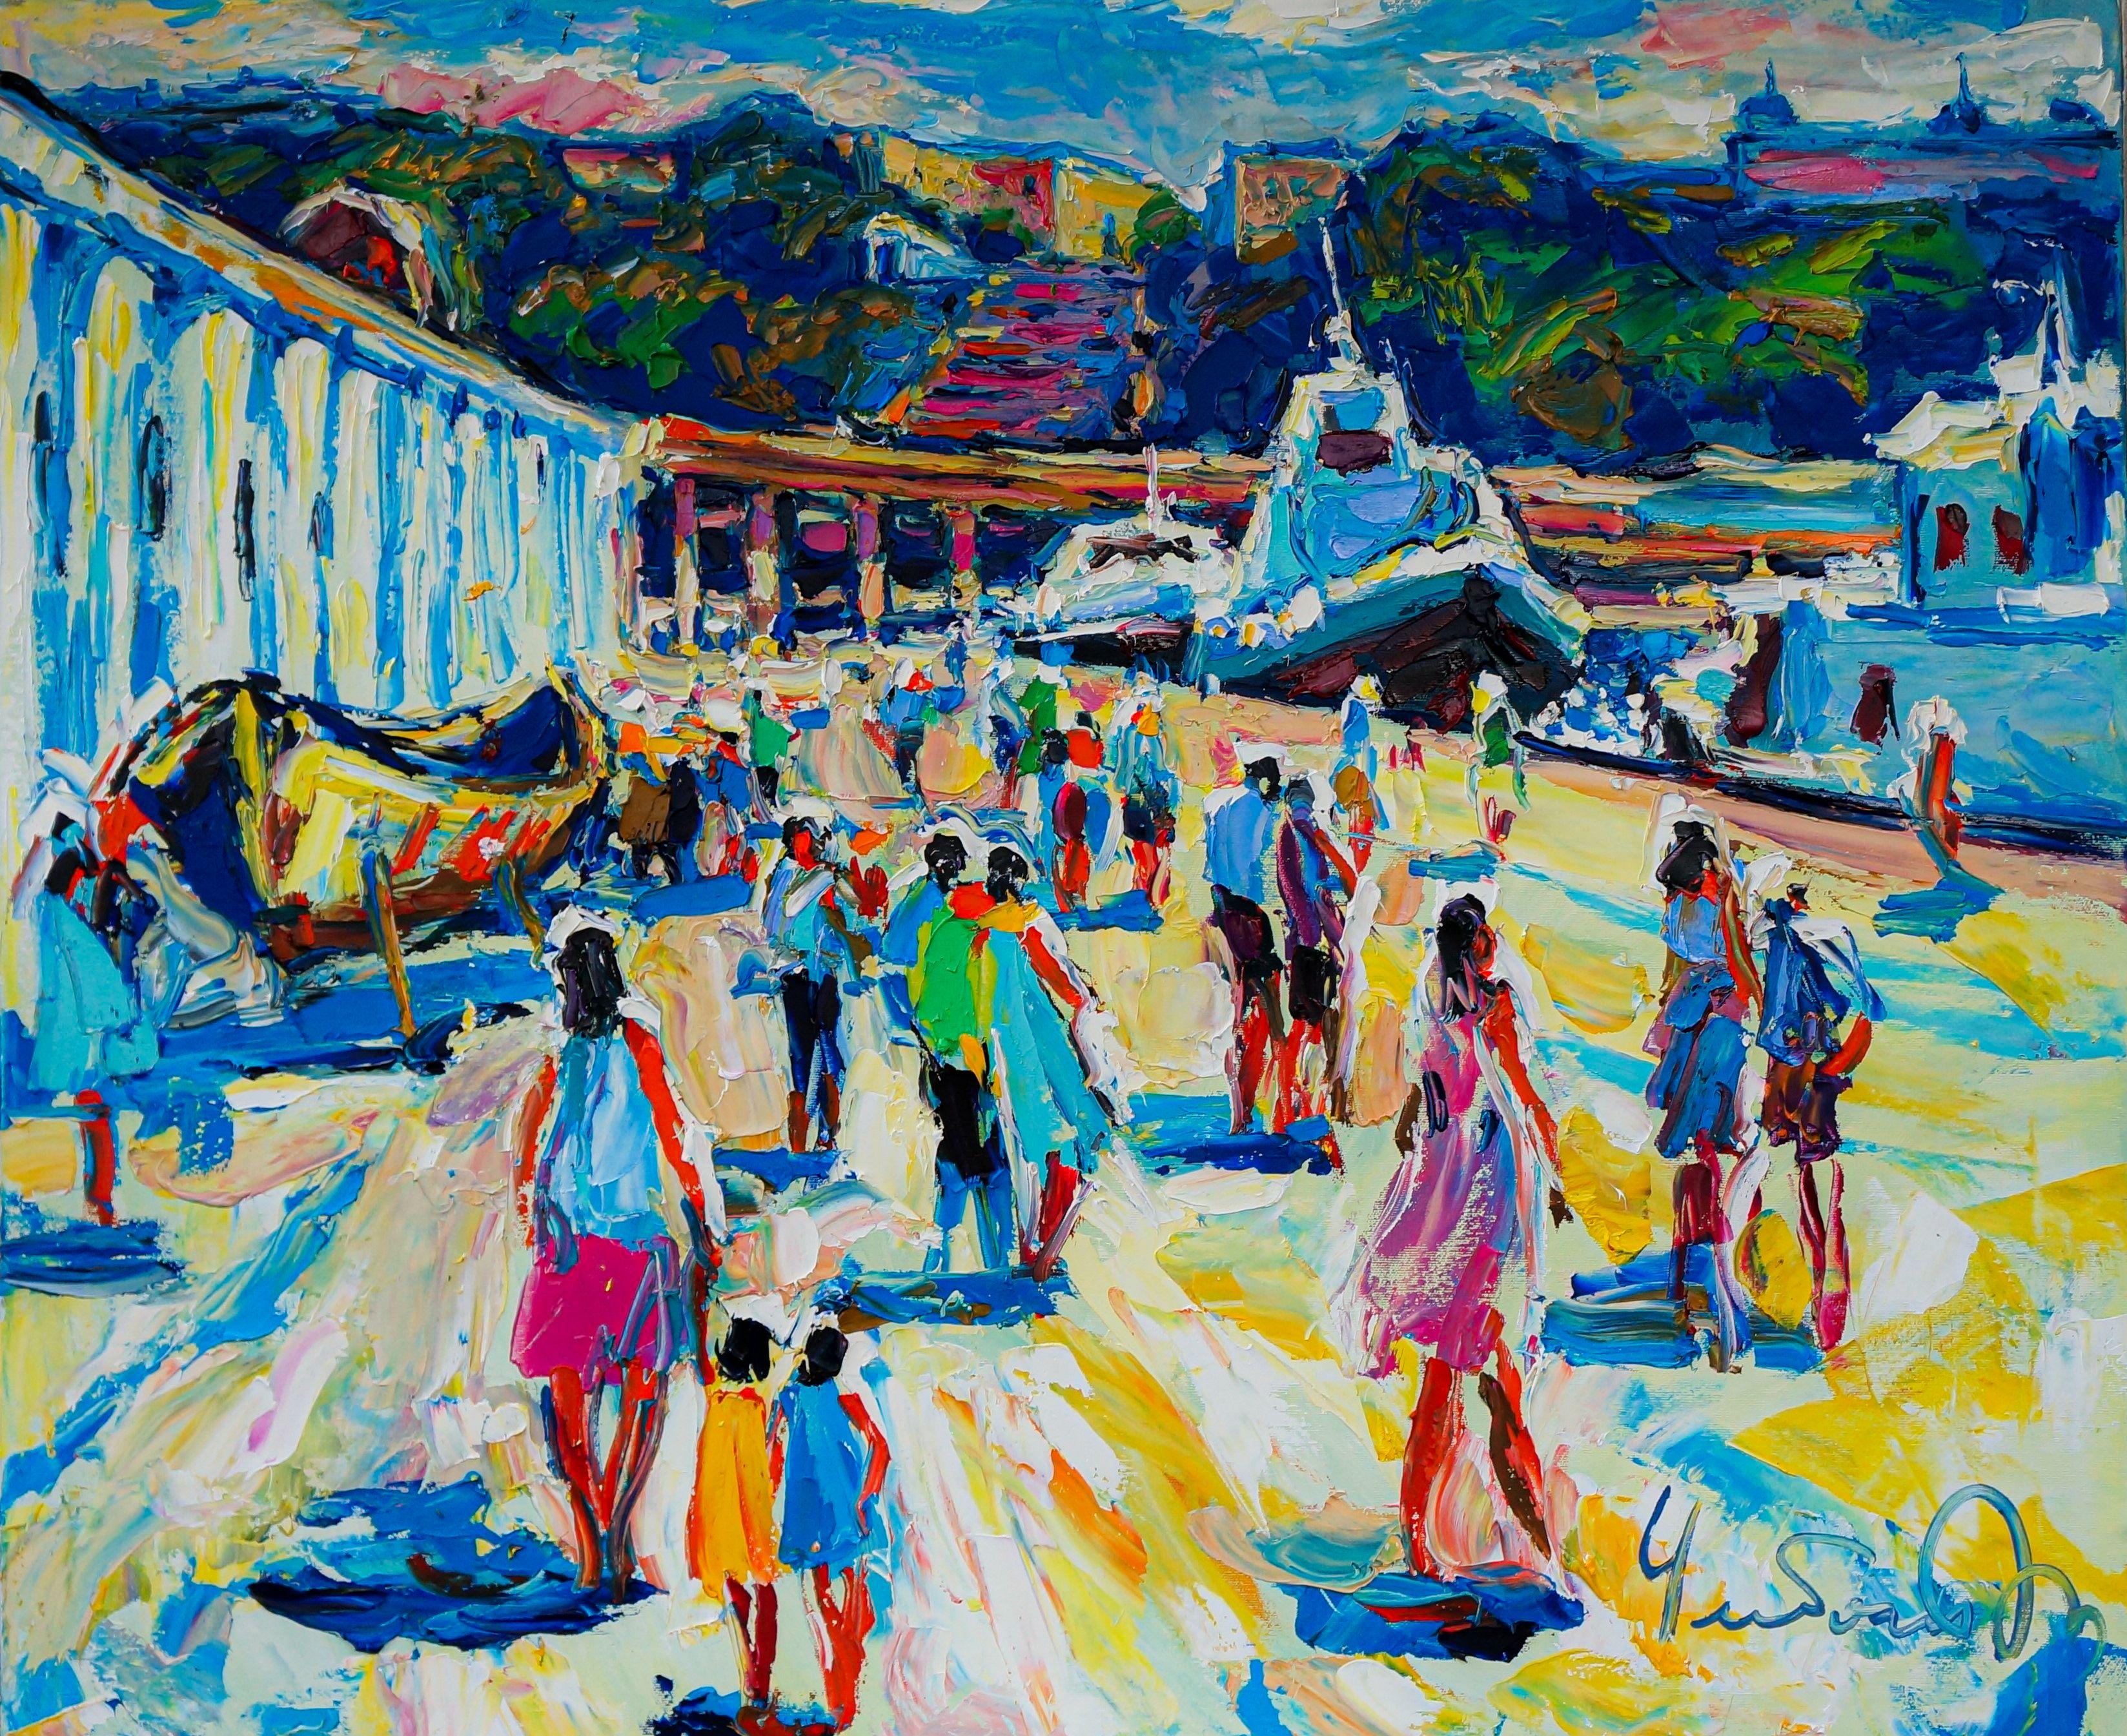 Vivid memories from Odessa, straight from the sea station. Bright sunlit people beckoning to the eye. :: Painting :: Impressionist :: This piece comes with an official certificate of authenticity signed by the artist :: Ready to Hang: No :: Signed: